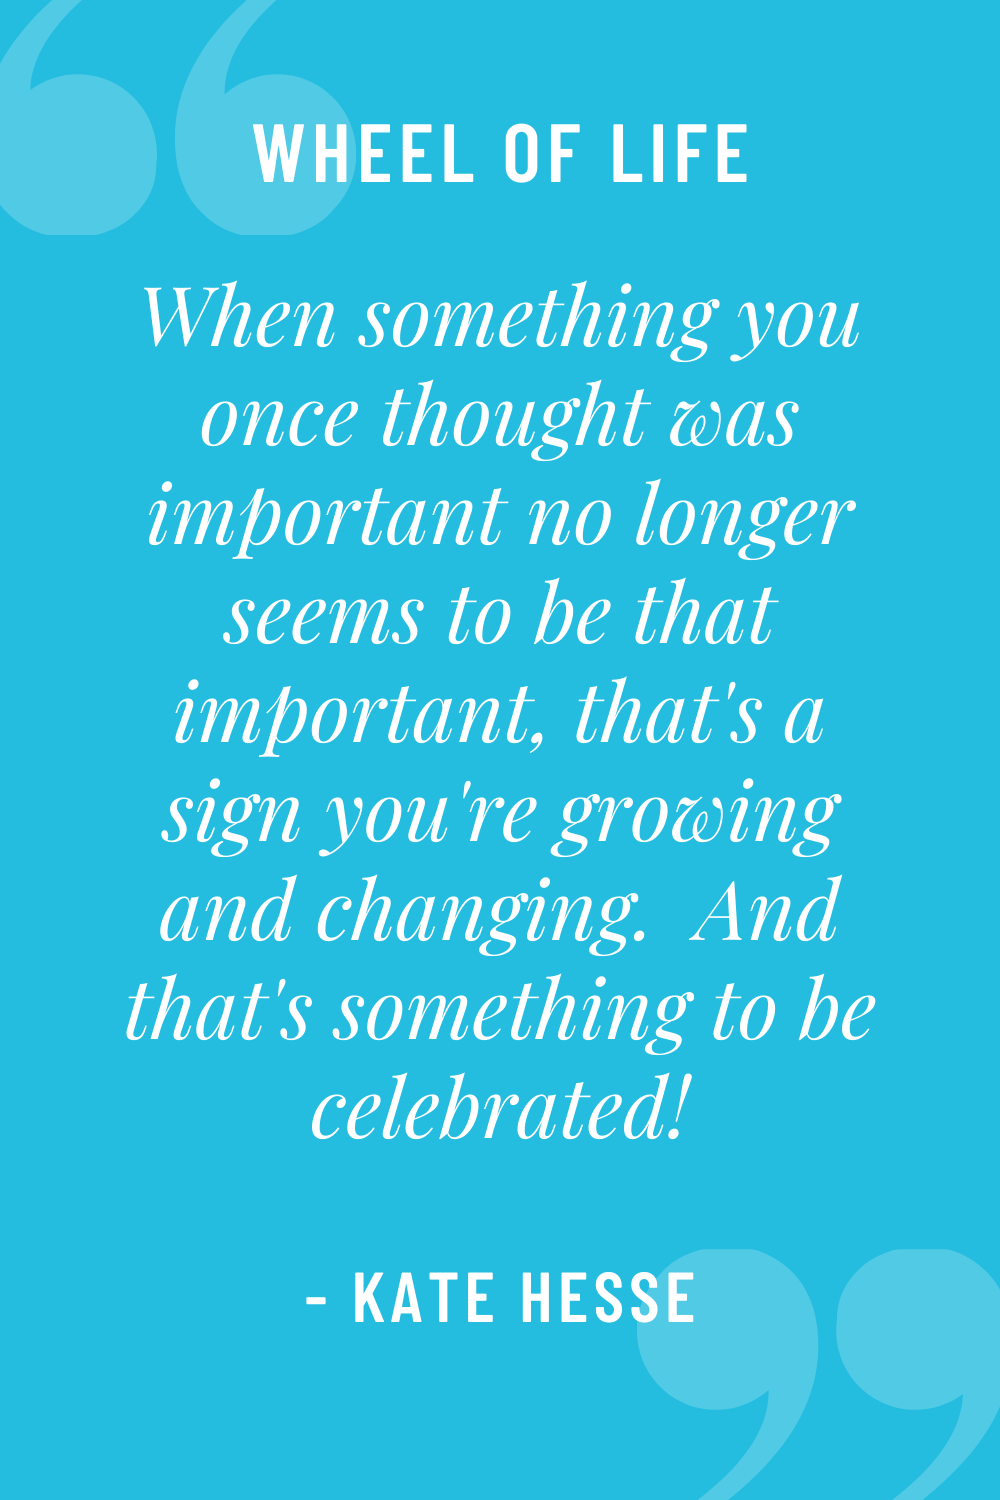 When something you once thought was important no longer seems to be that important, that's a sign you're growing and changing. And that's something to be celebrated!